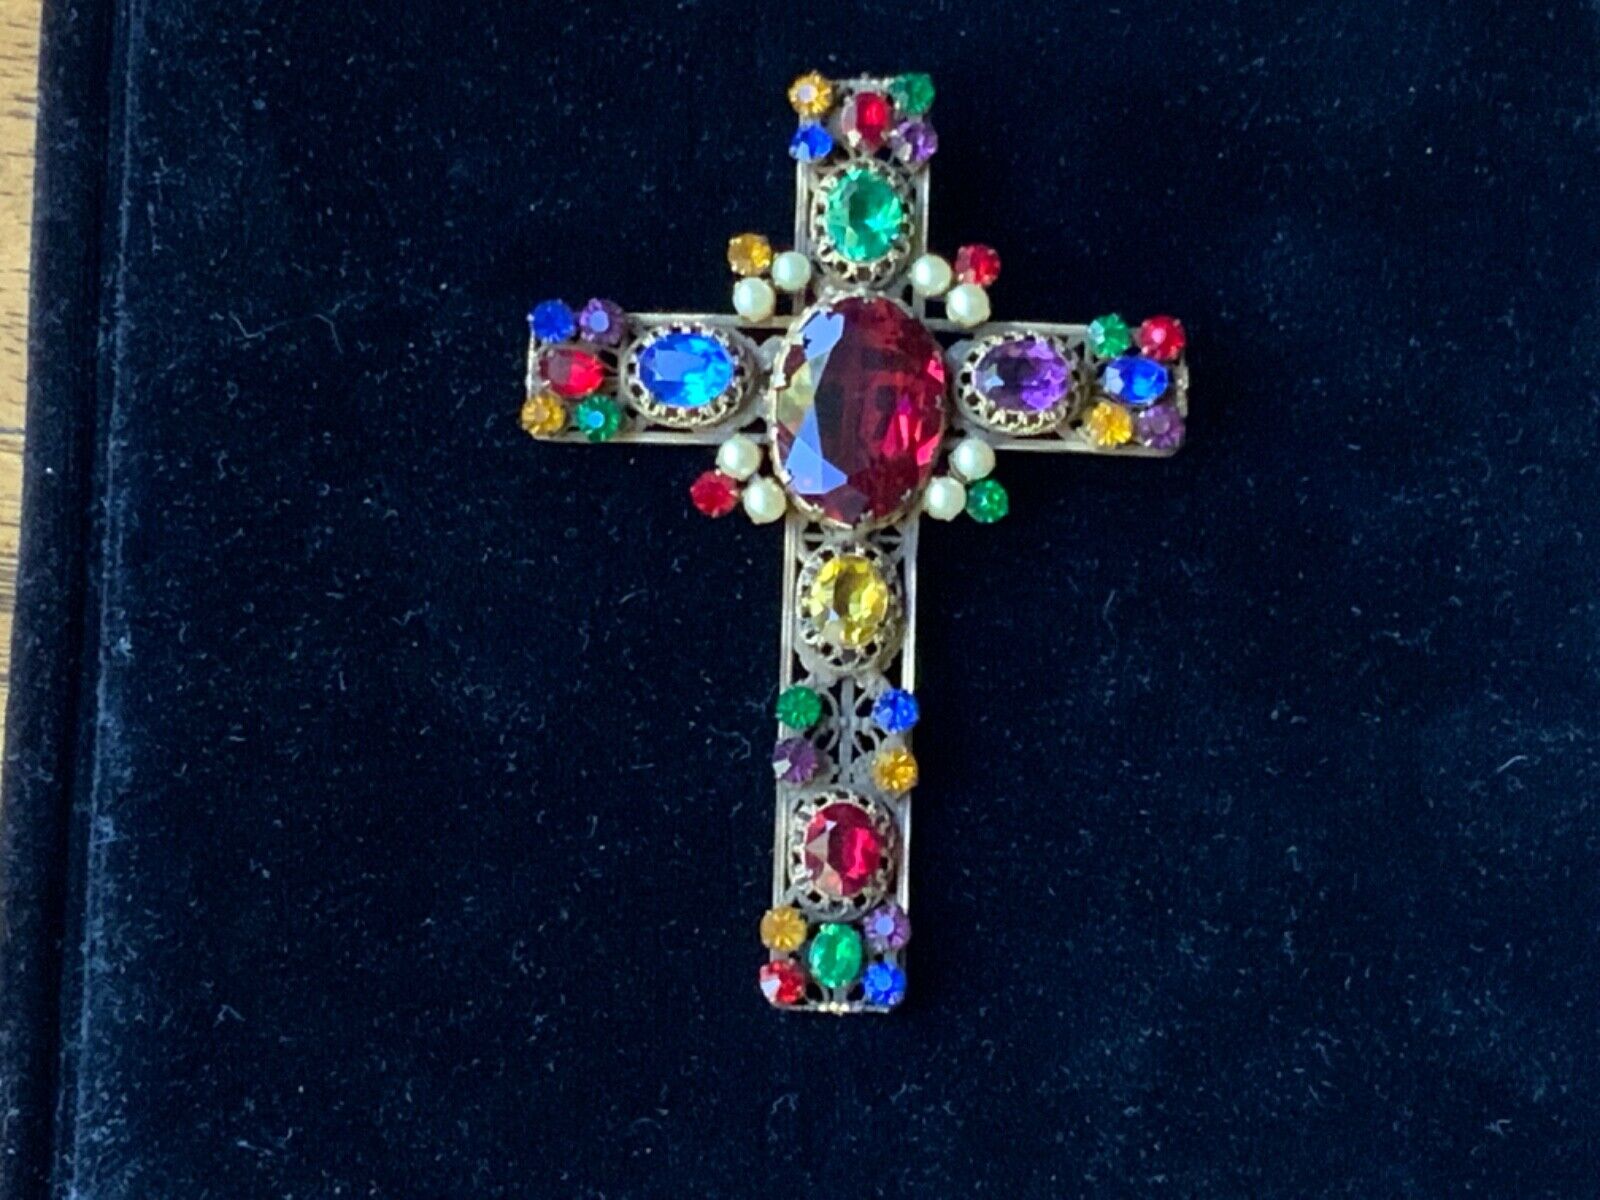 French Antique Jeweled Filagree Cross Necklace Pennant Circa 1900-1905